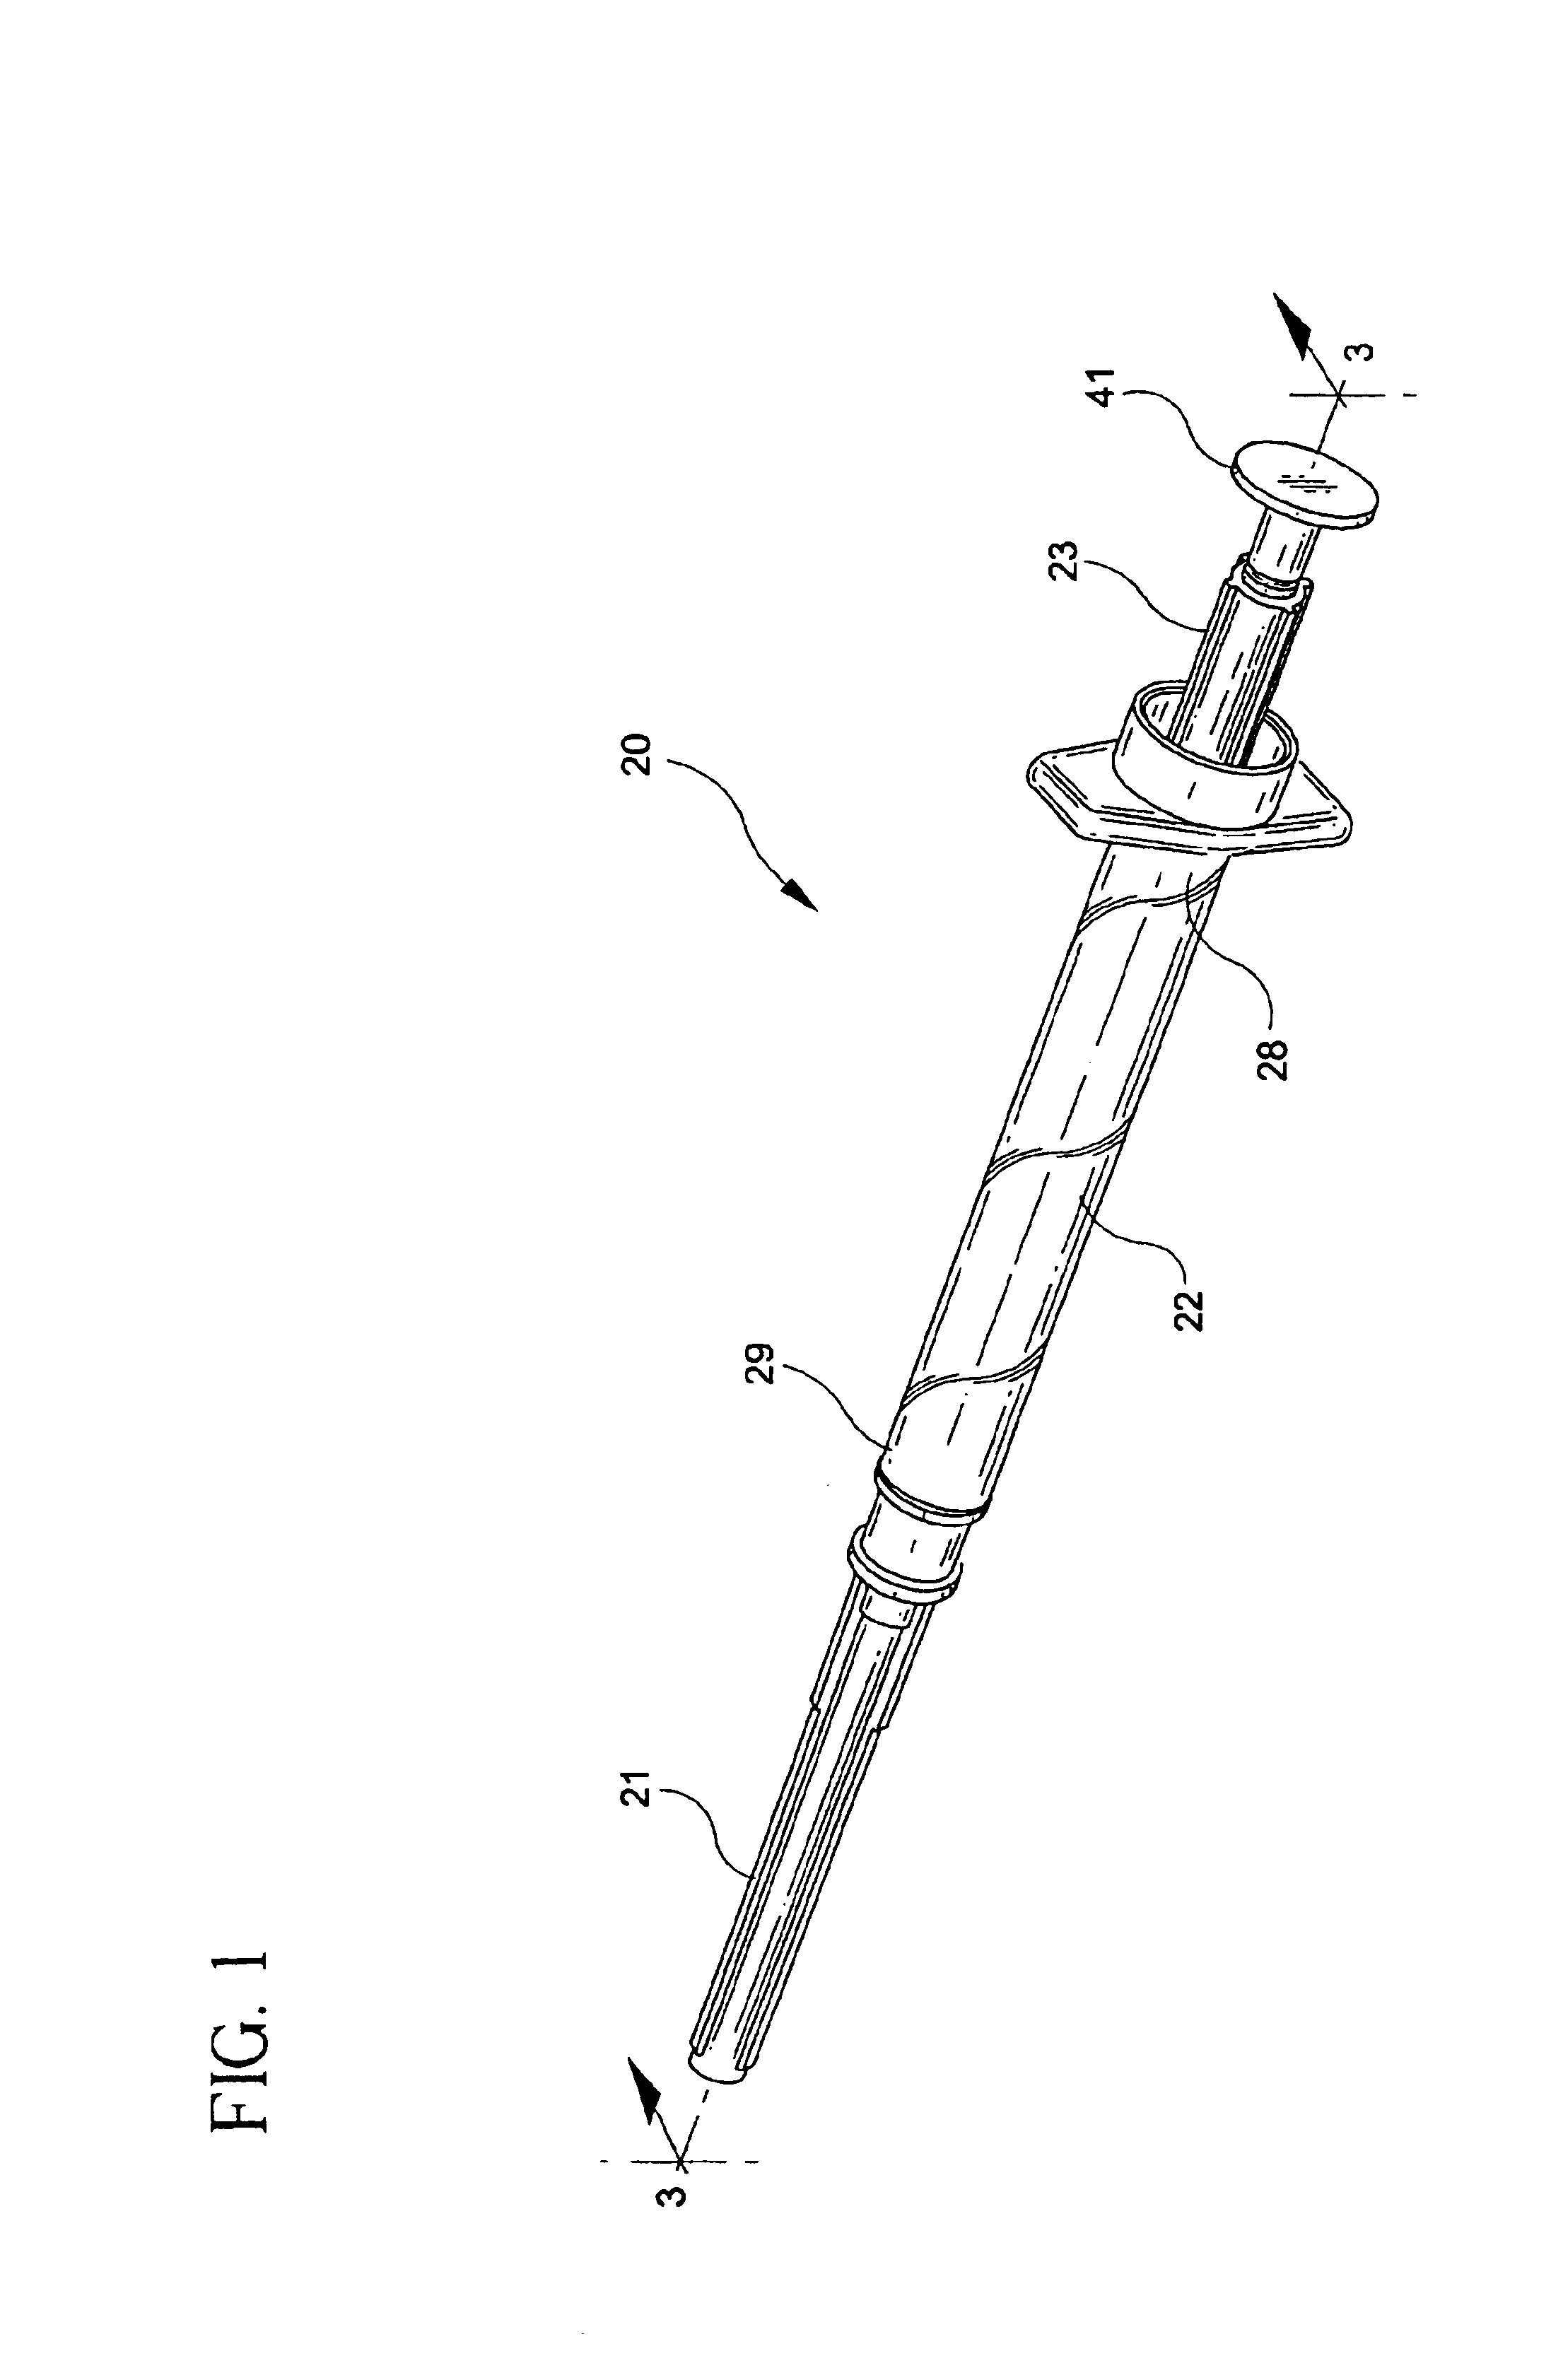 Attachment for a medical device